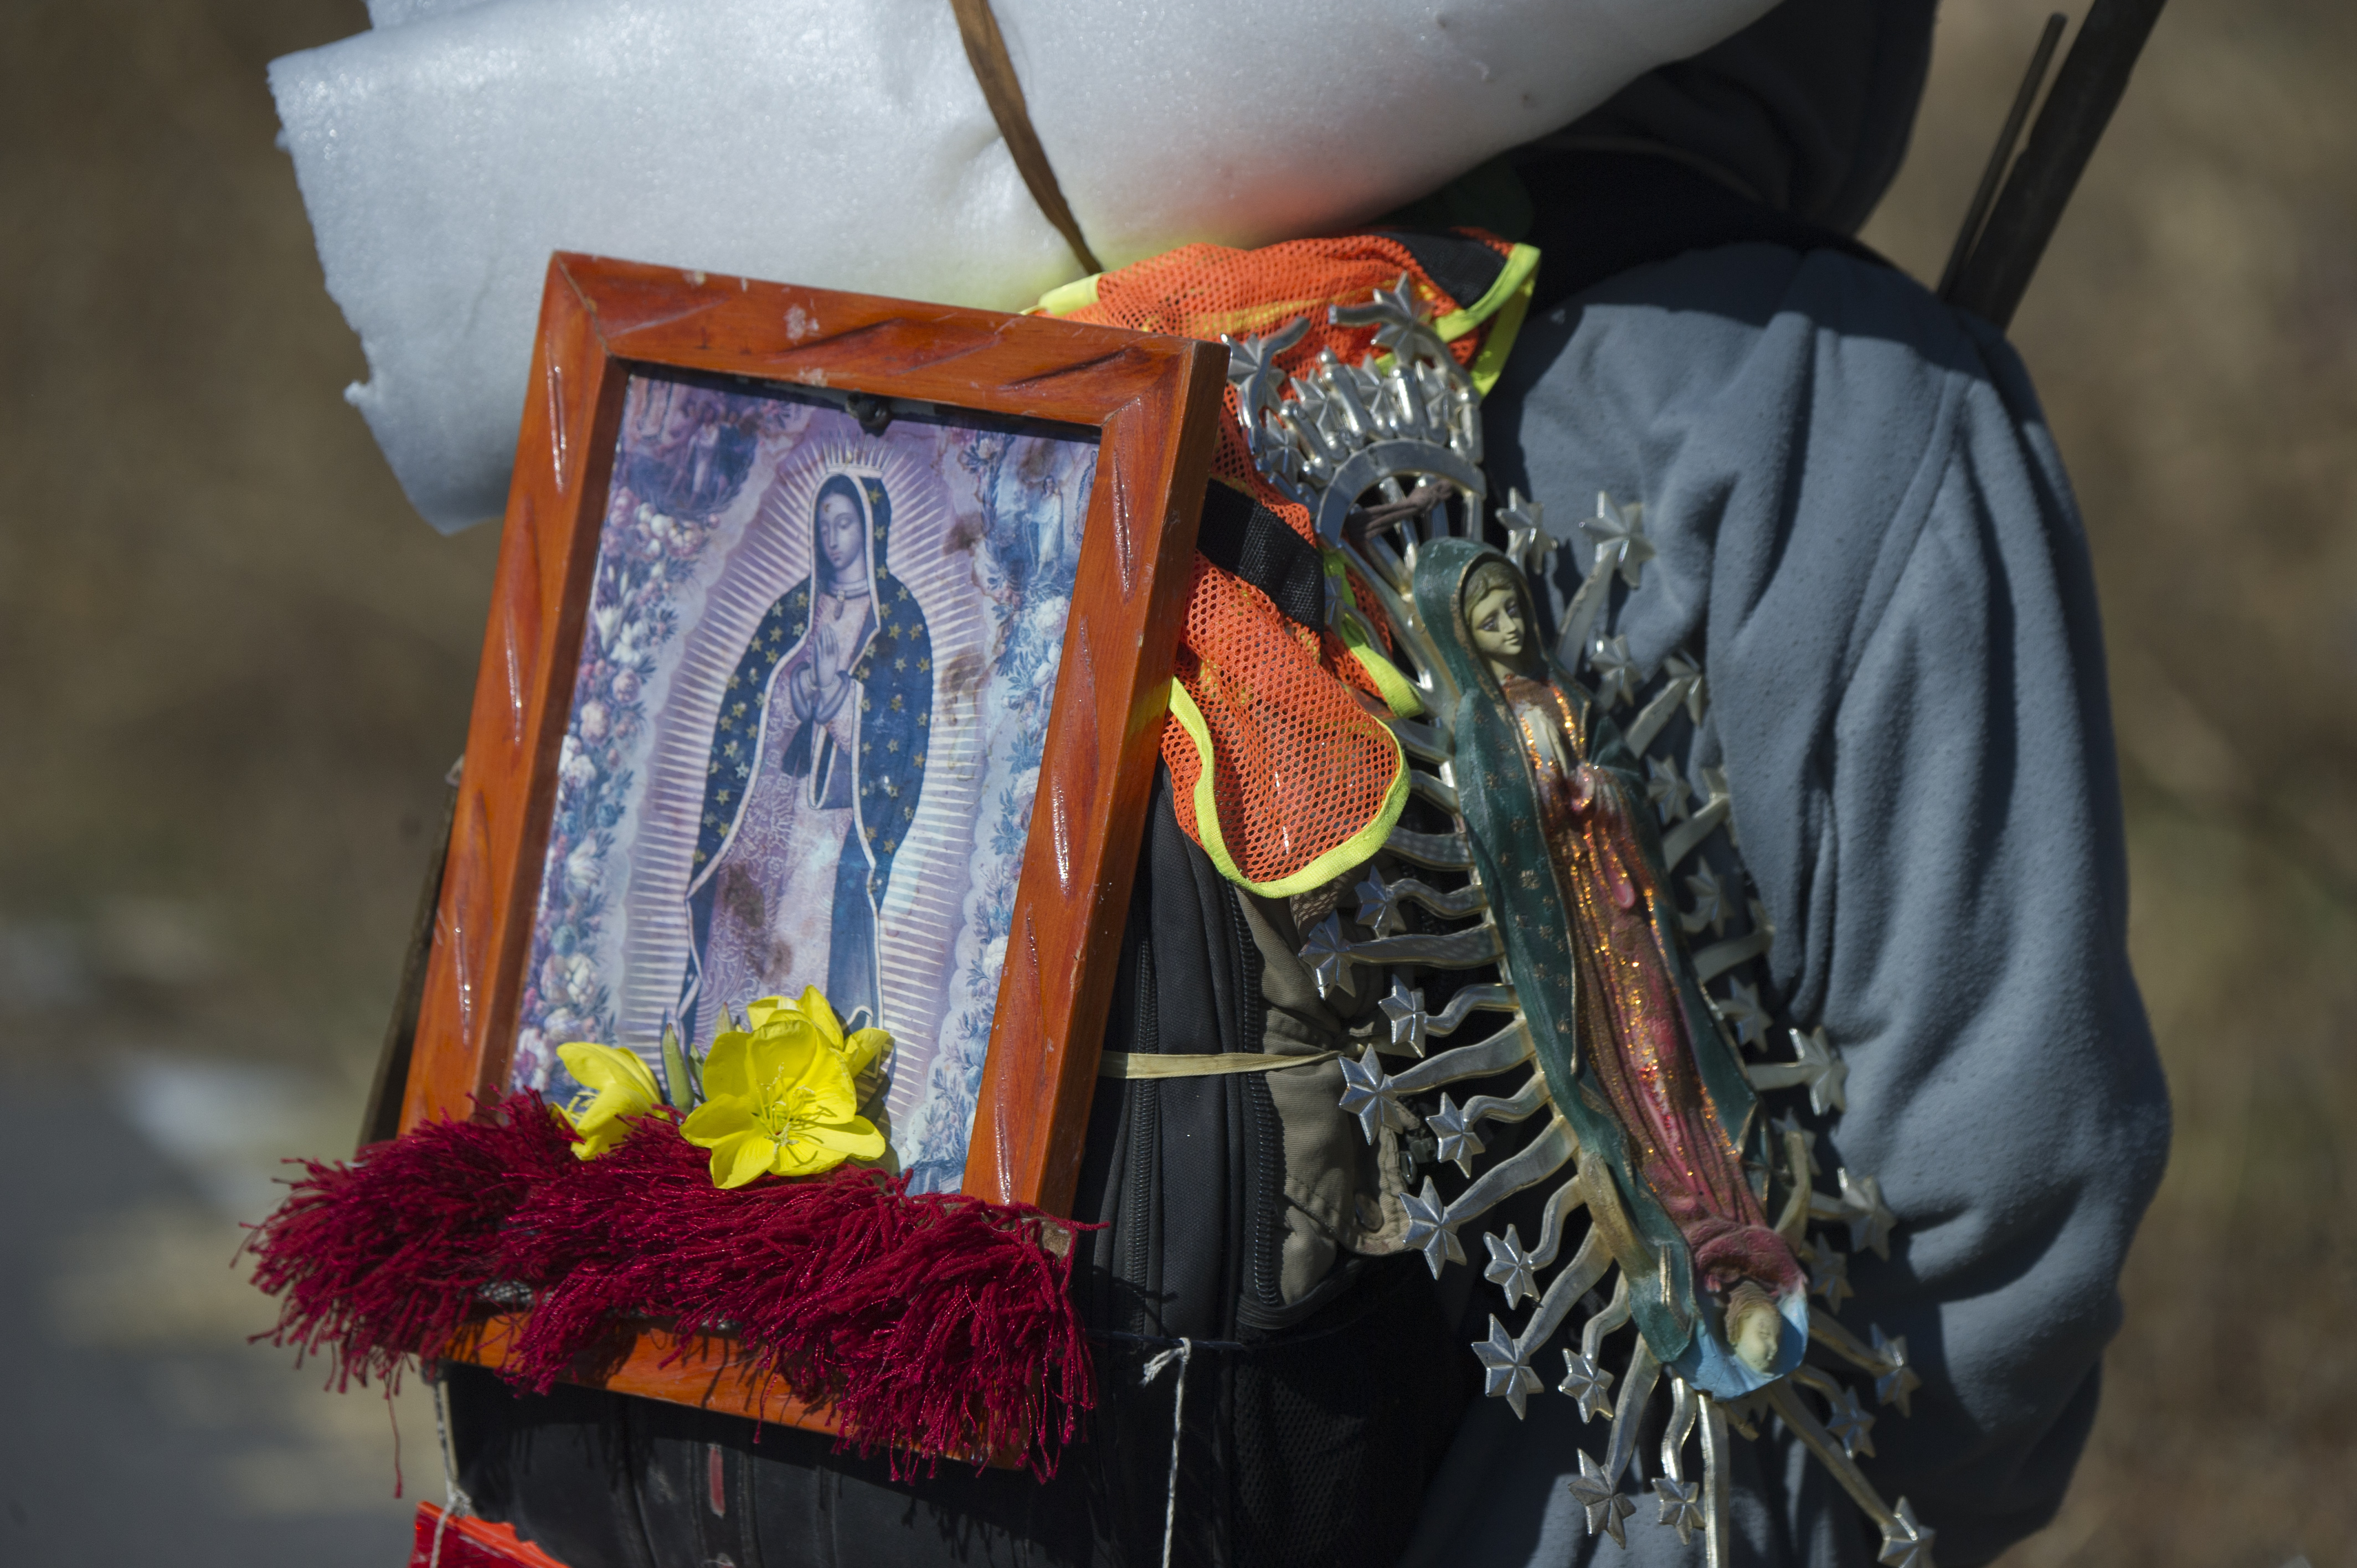 A pilgrim carries images of the Virgin of Guadalupe as he walks in Santiago Xalitzintla, Puebla, Mexico, on their way to the Basilica of Guadalupe in Mexico City, on December 7, 2020, amid the COVID-19 novel coronavirus pandemic. - The Basilica of Guadalupe will remain closed from December 10 to 13 during the festivities of the Virgen Morena to avoid crowds and minimize the risks of possible contagion of COVID-19 among pilgrims. (Photo by Claudio CRUZ / AFP)